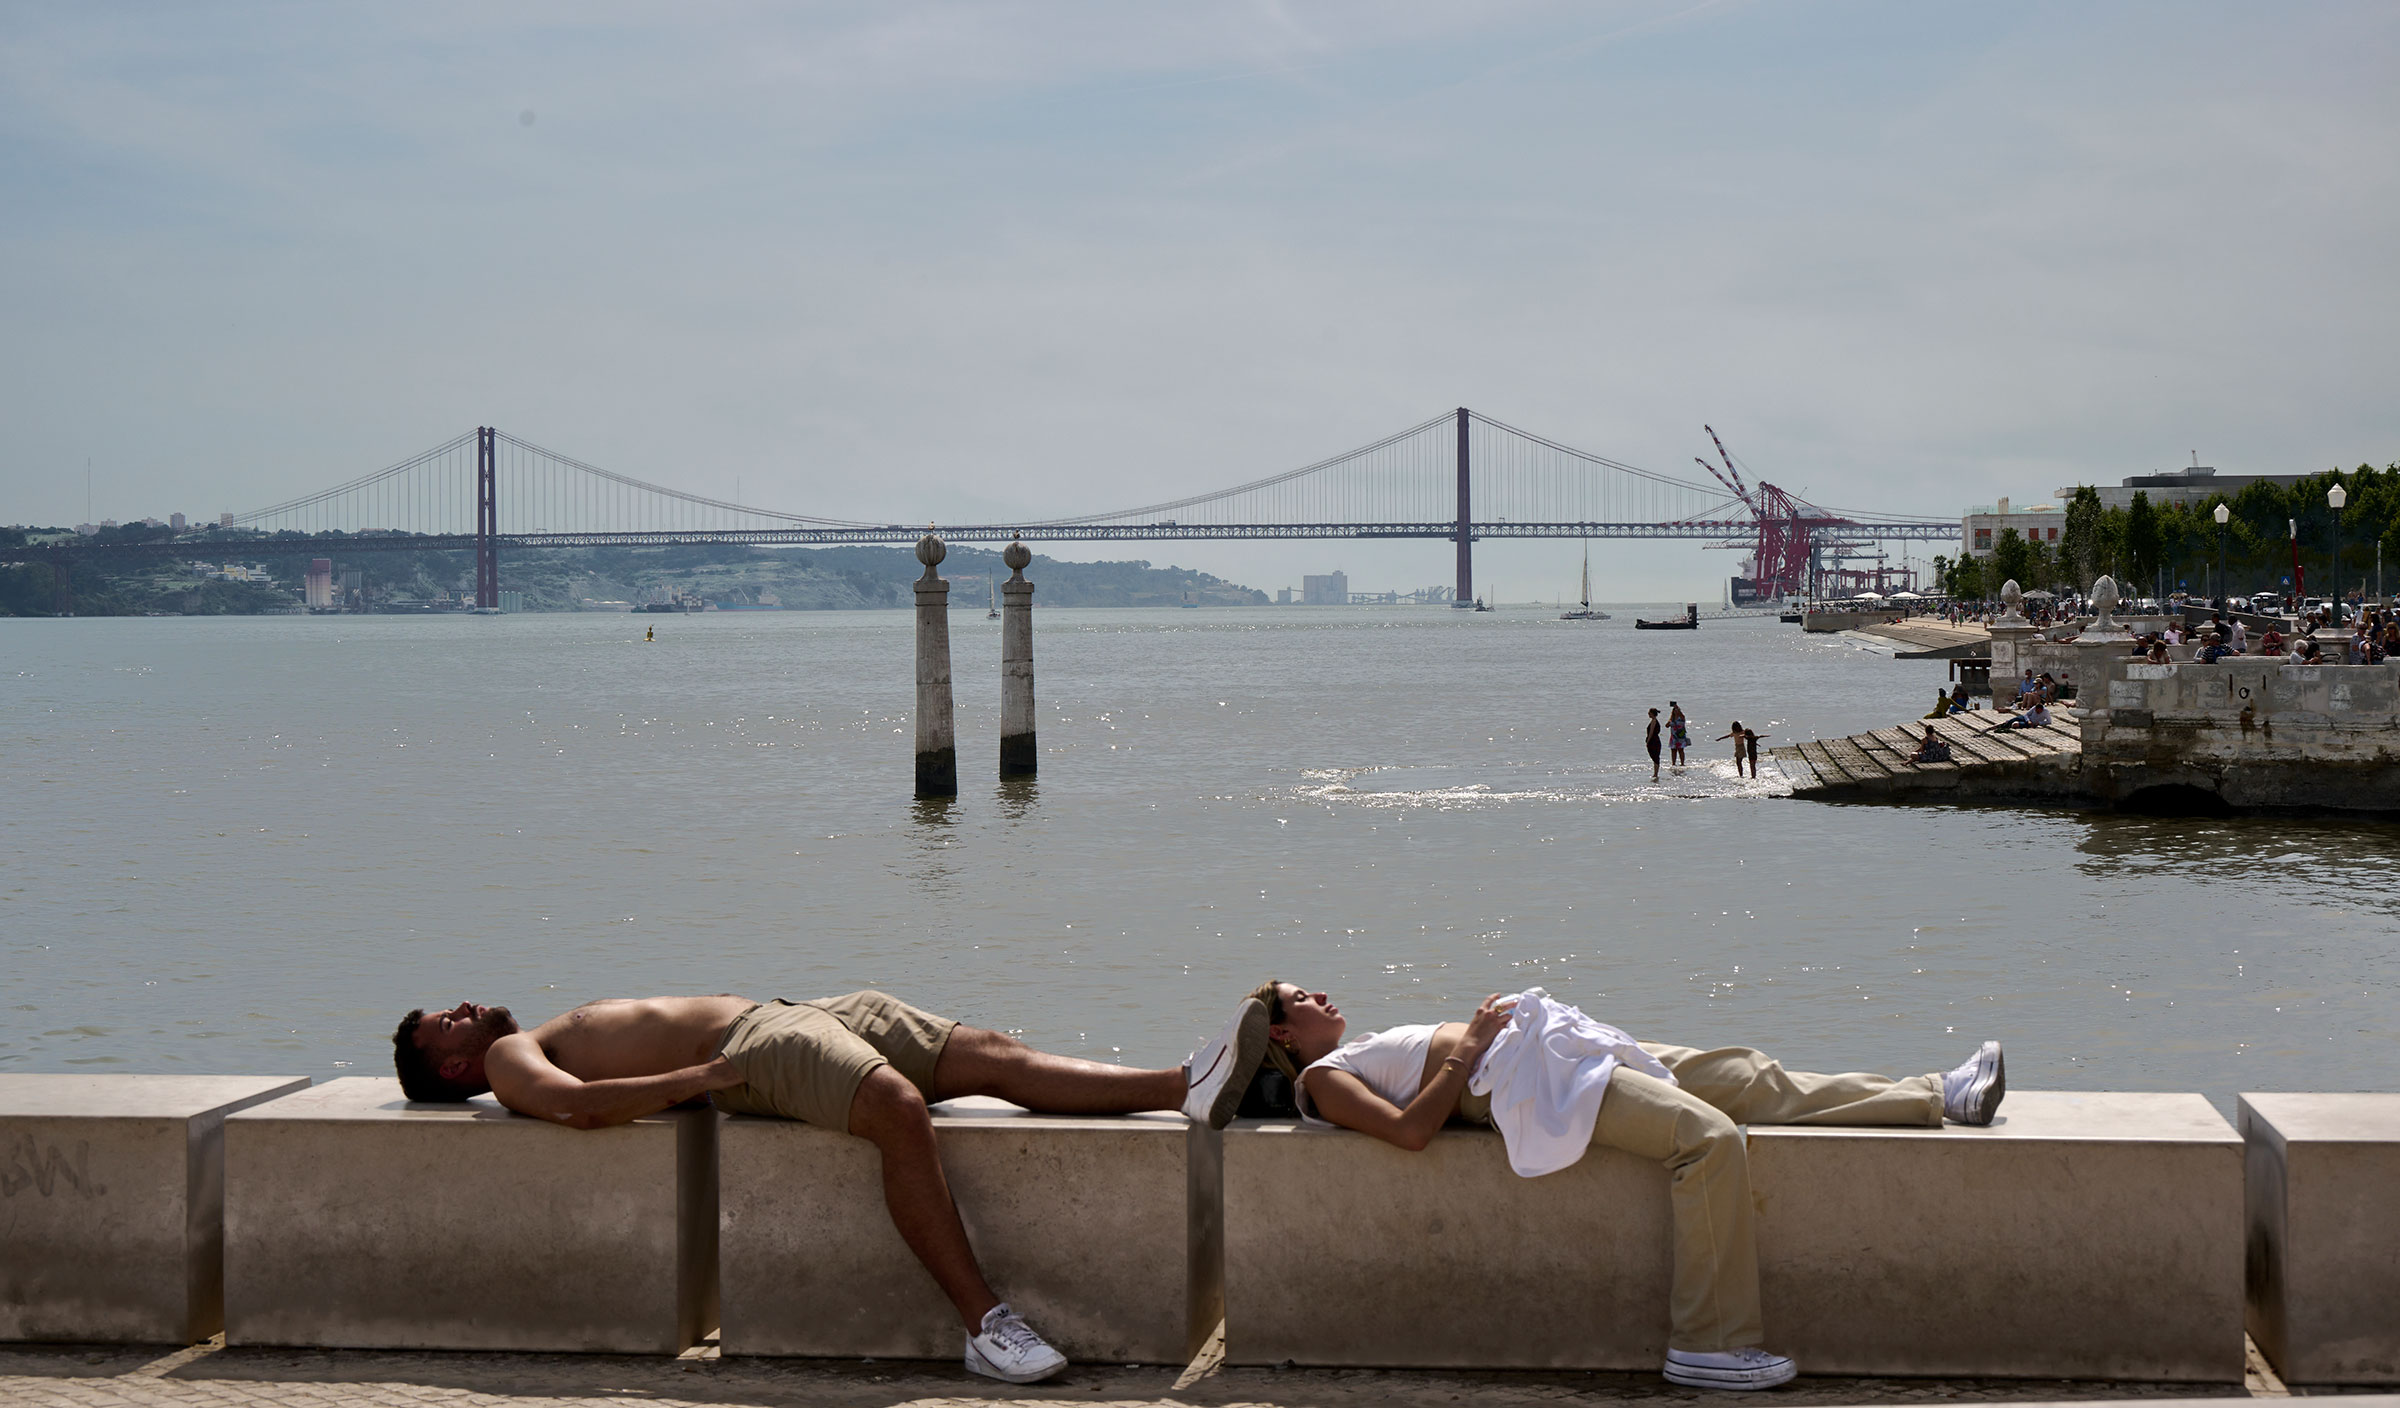 A couple sunbathes as tourists are seen in the background in Cais das Colunas in Lisbon, Portugal on May 19, 2022. (Horacio Villalobos—Corbis/Getty Images)